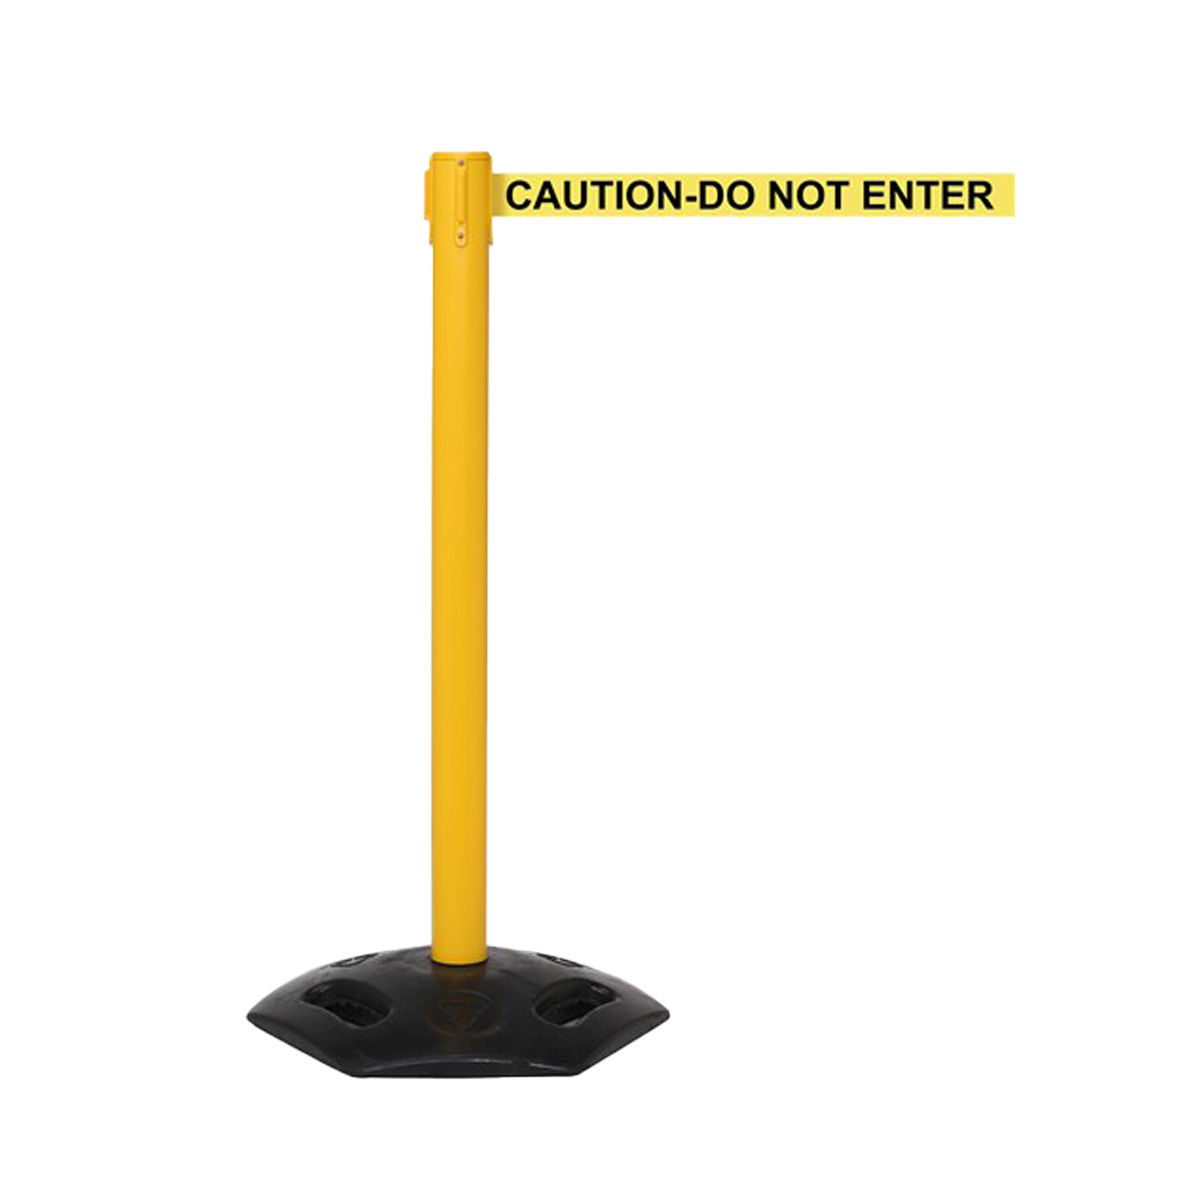 WeatherMaster Outdoor Retractable Crowd Barriers Yellow Post With Printed Safety Message Belt